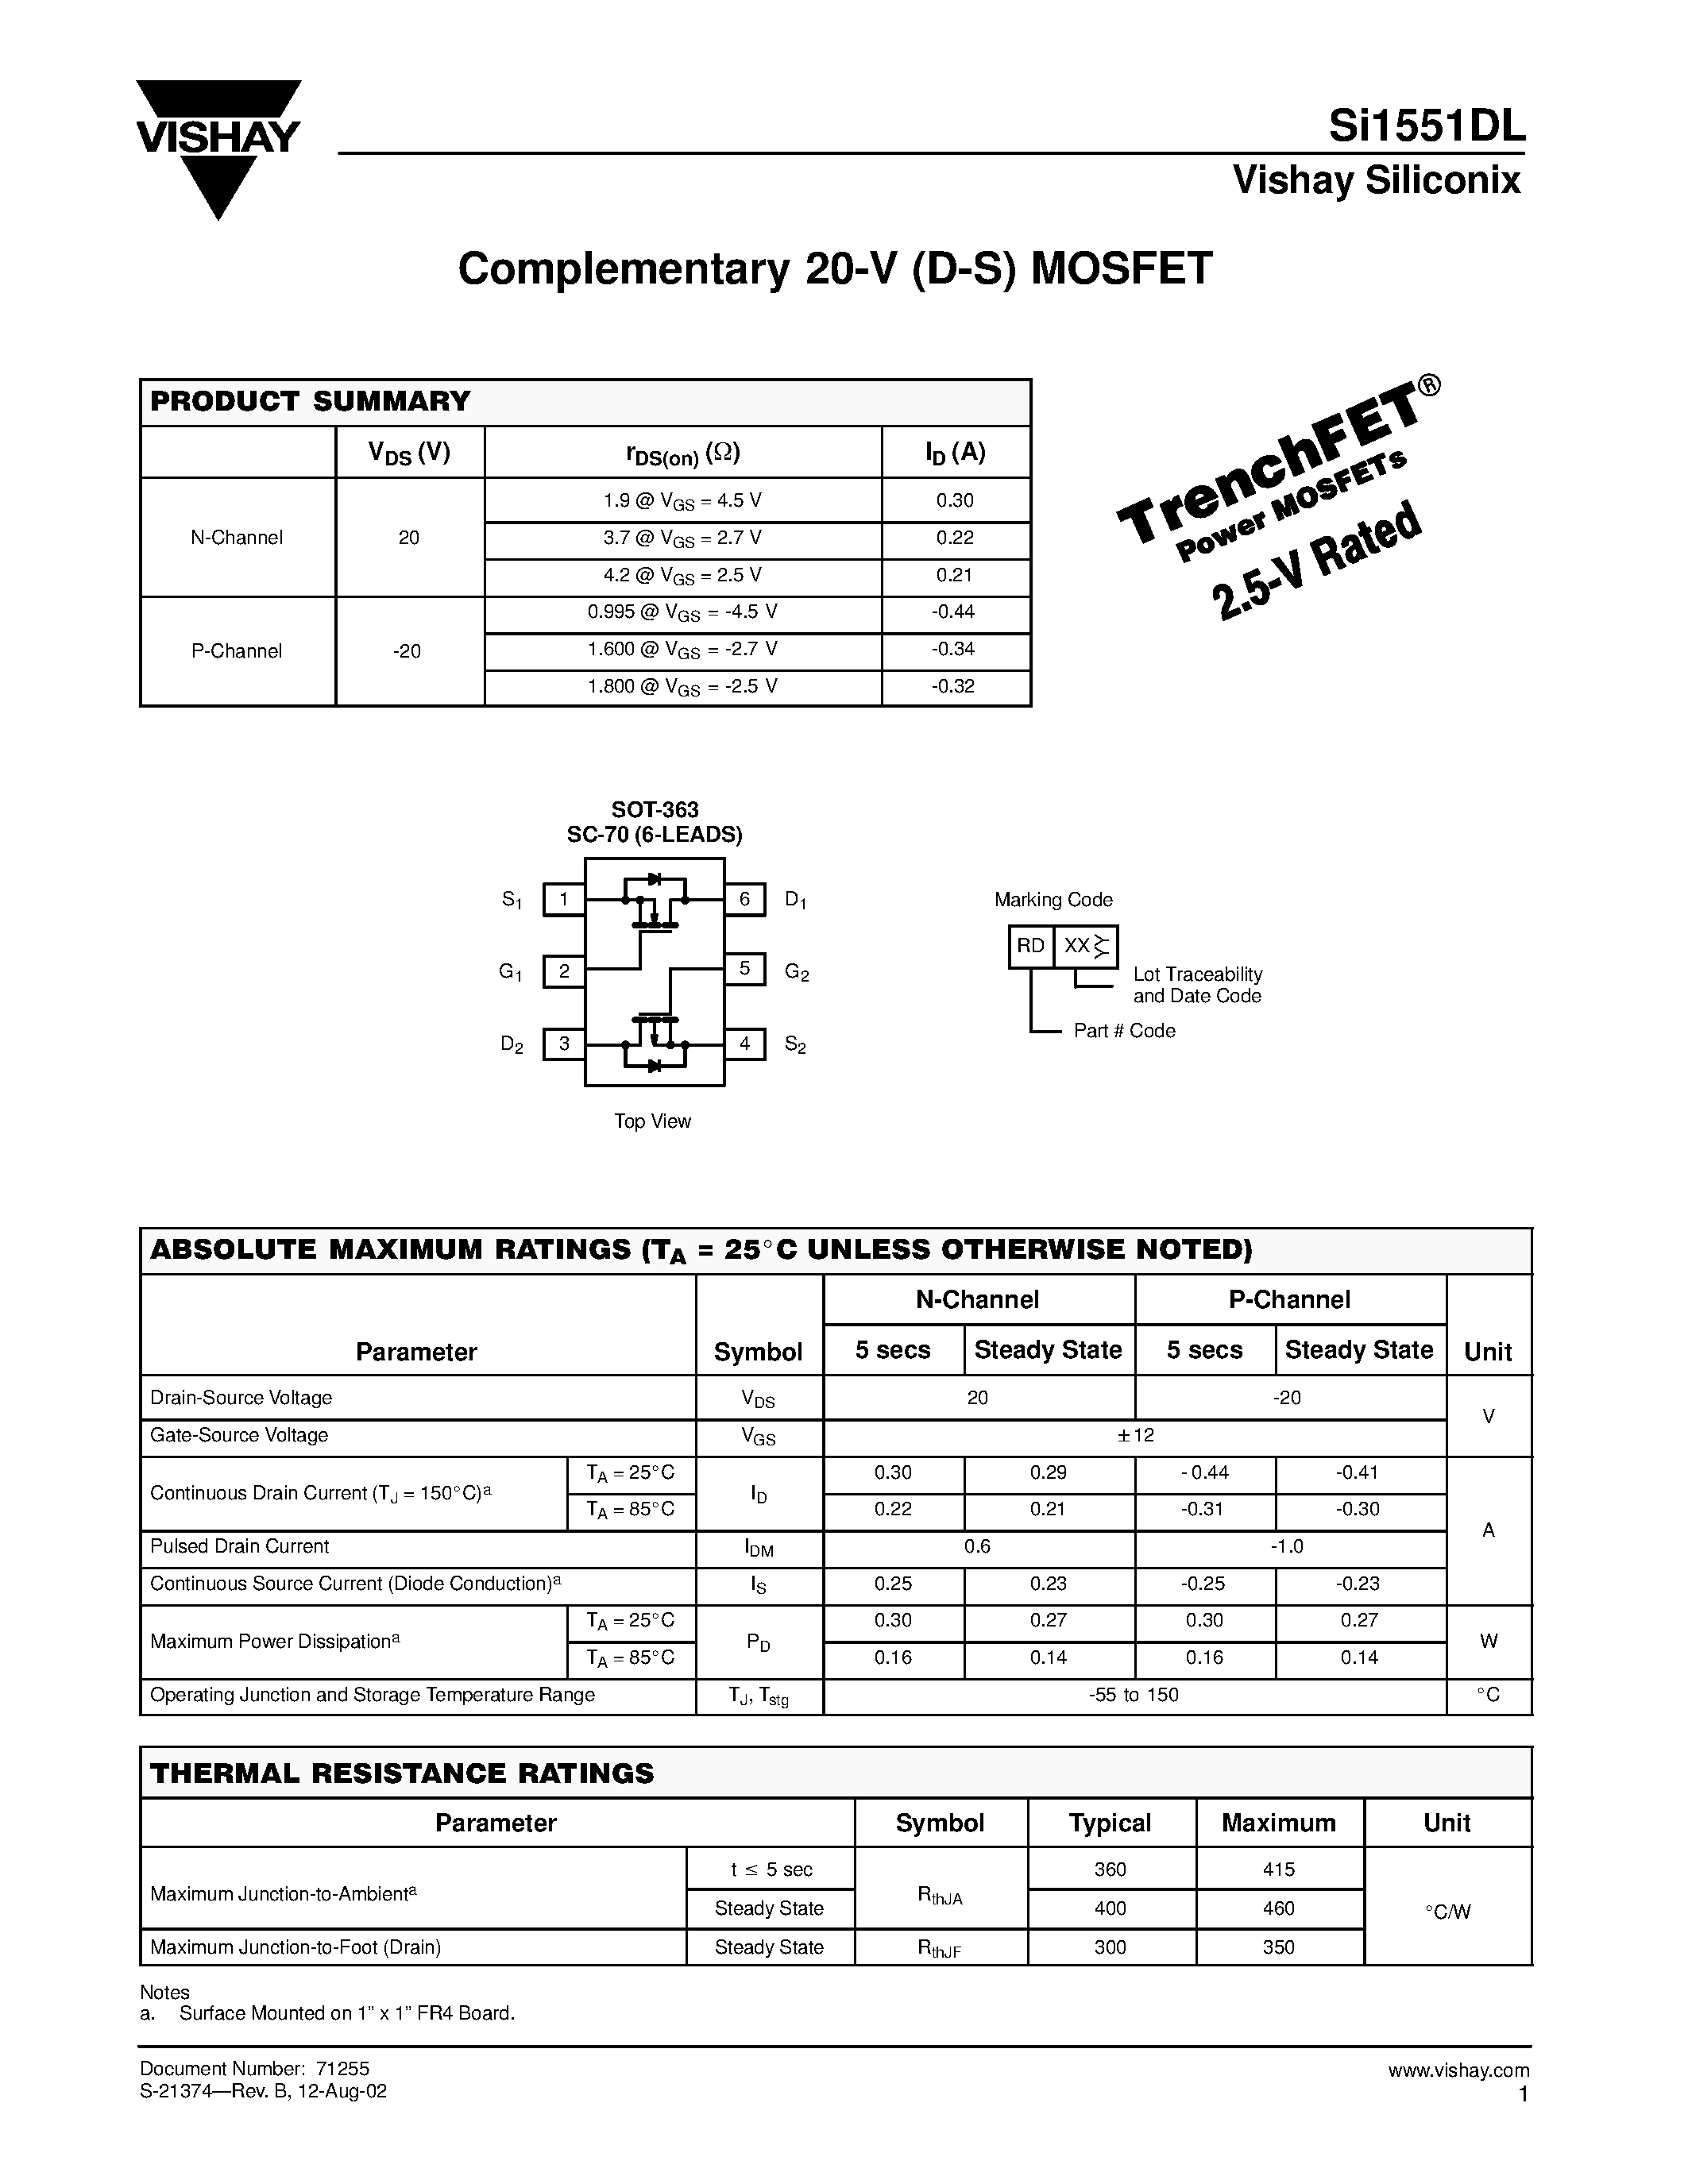 Datasheet SI1551DL - Complementary 20-V (D-S) MOSFET page 1